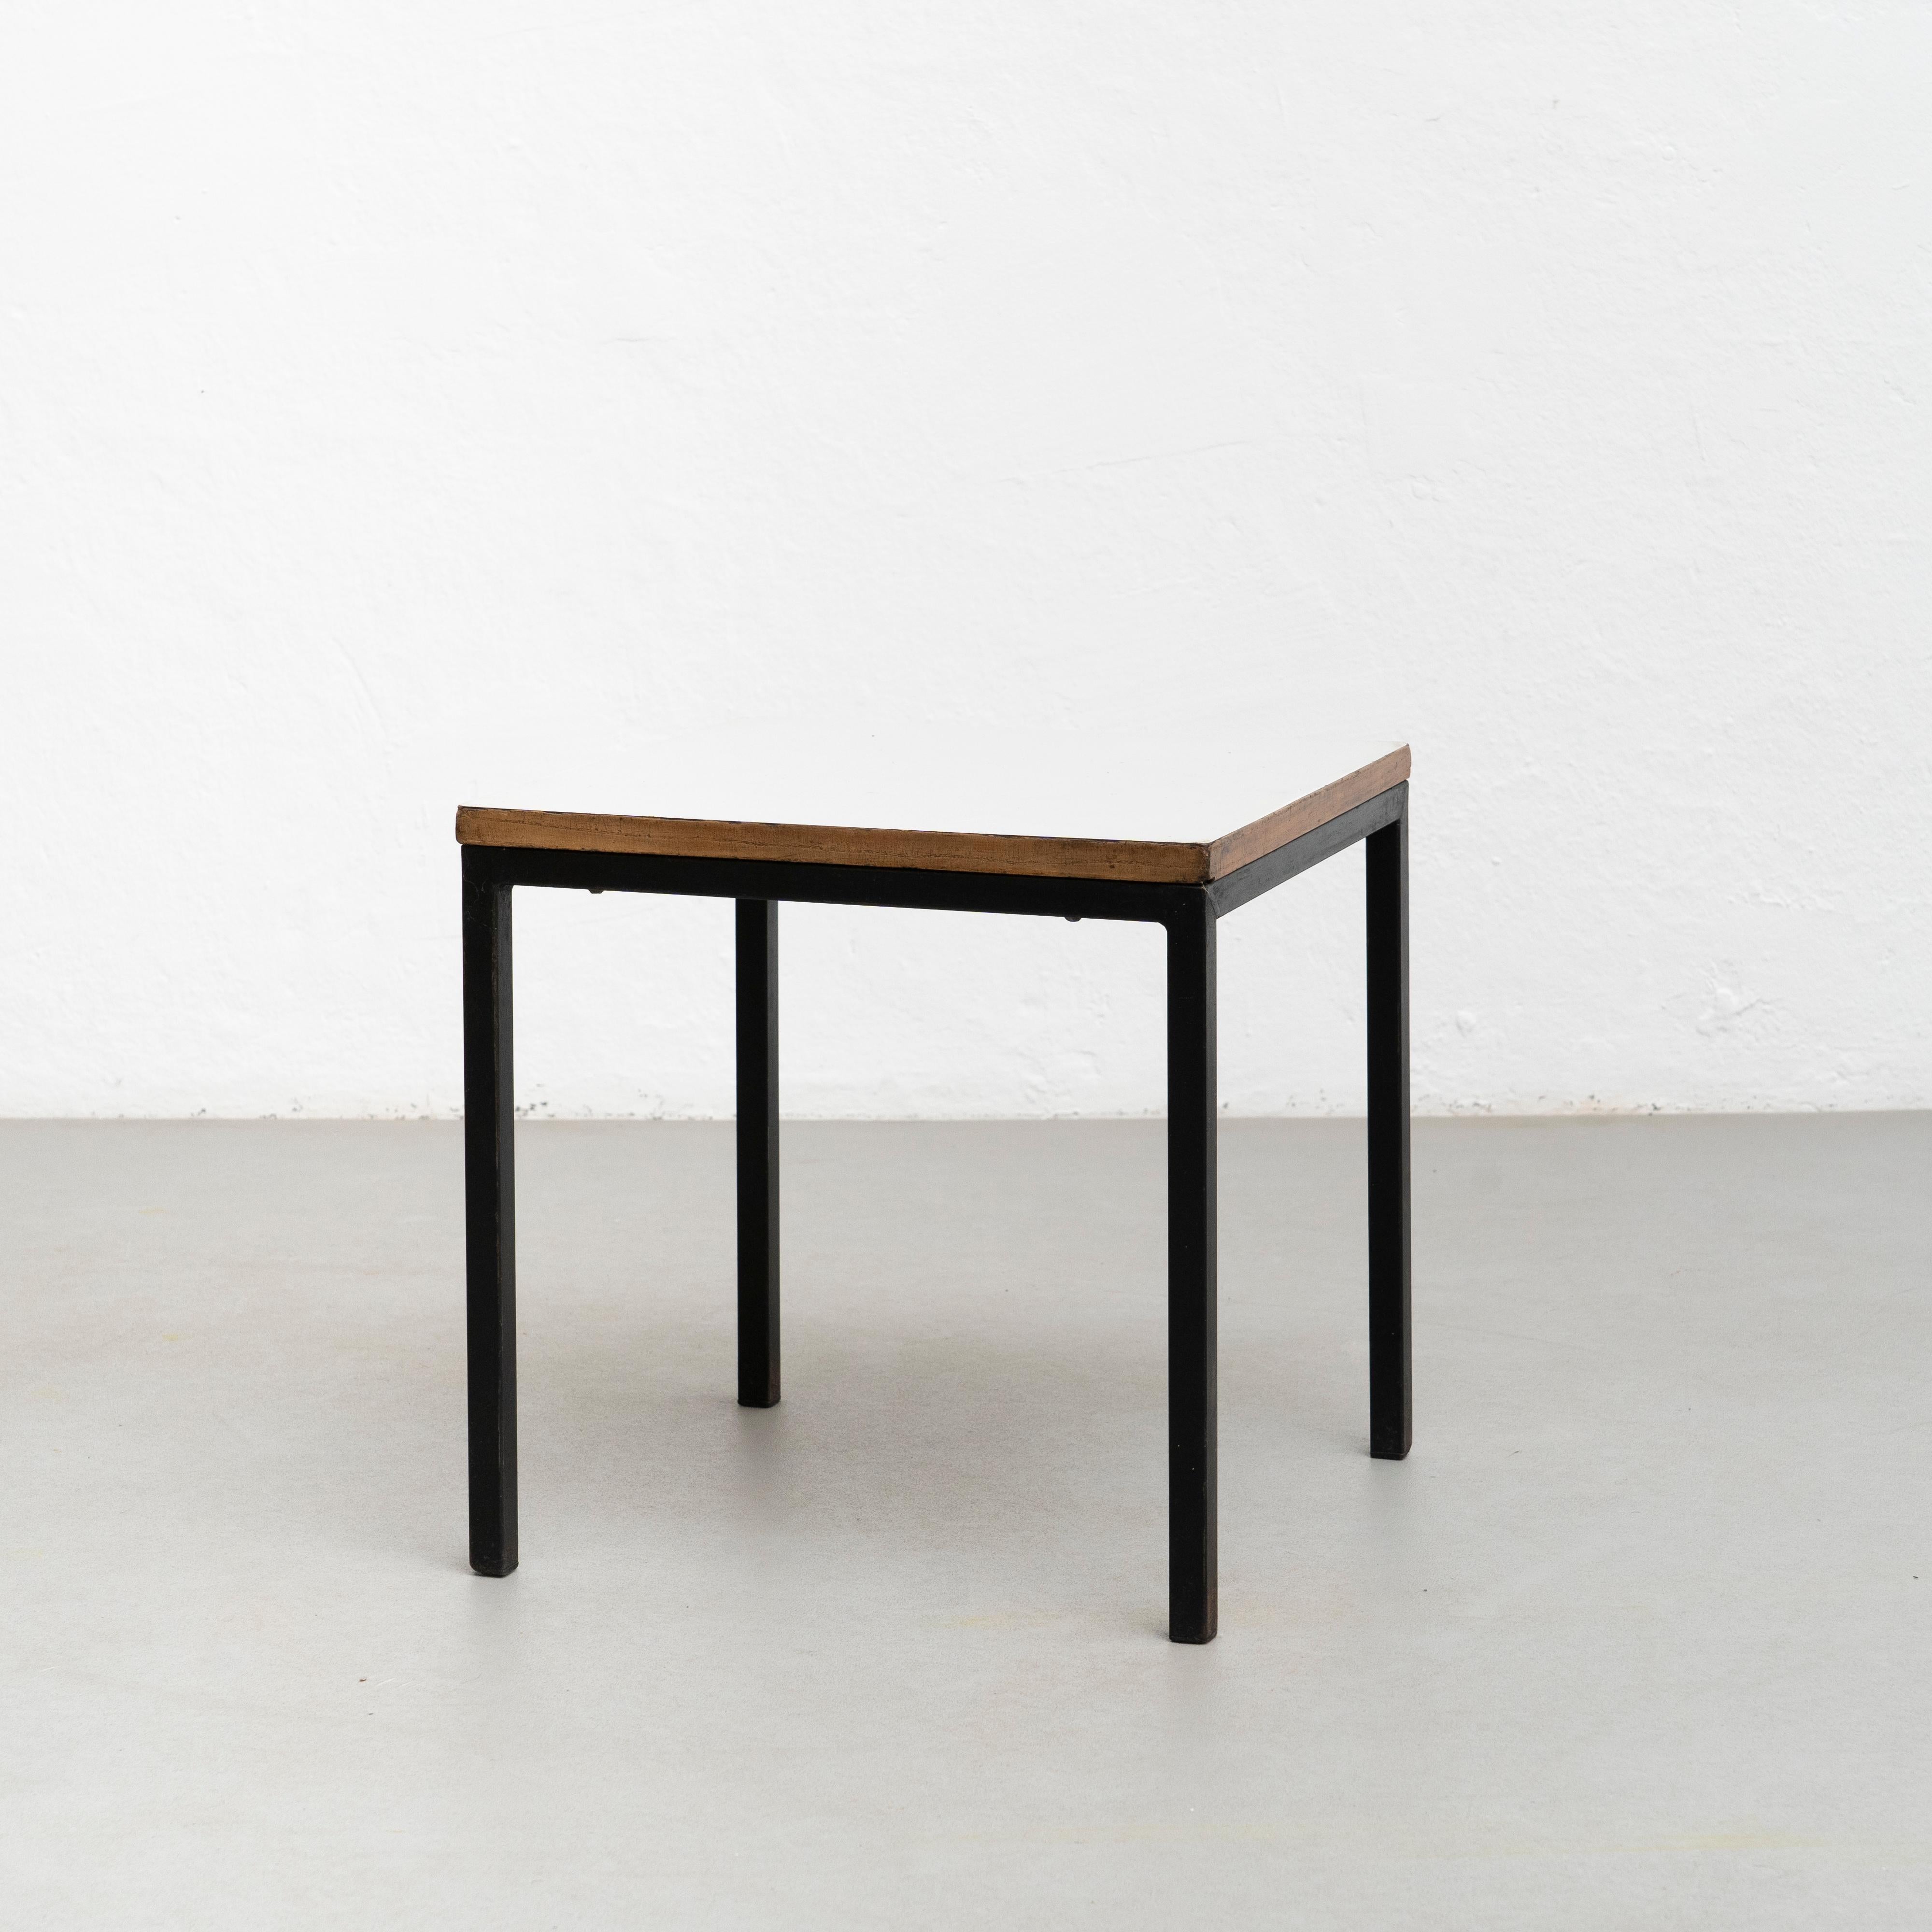 Mid-Century Modern Charlotte Perriand Metal, Wood and Formica Table for Cansado, circa 1950